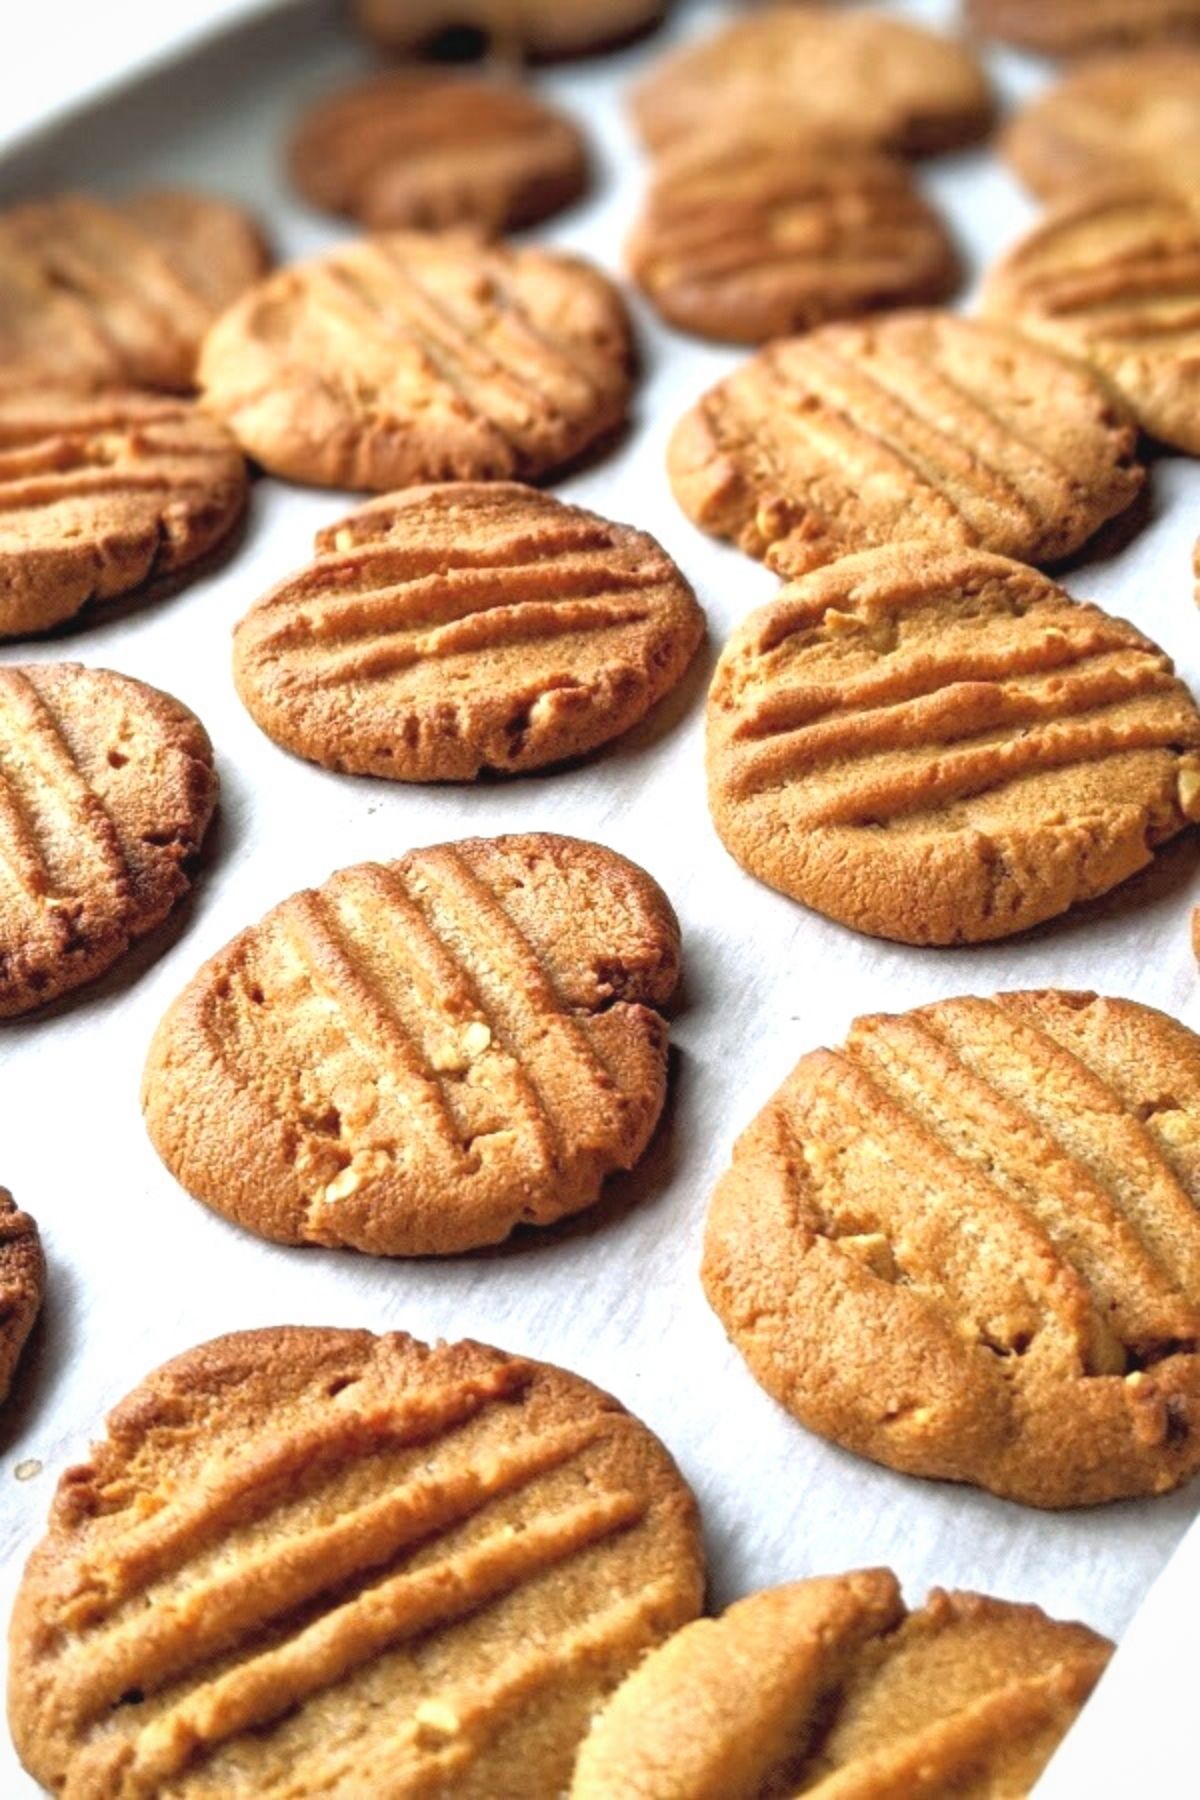 low sodium cookies no salt added dessert recipe peanut butter cookies with unsalted peanut butter recipes